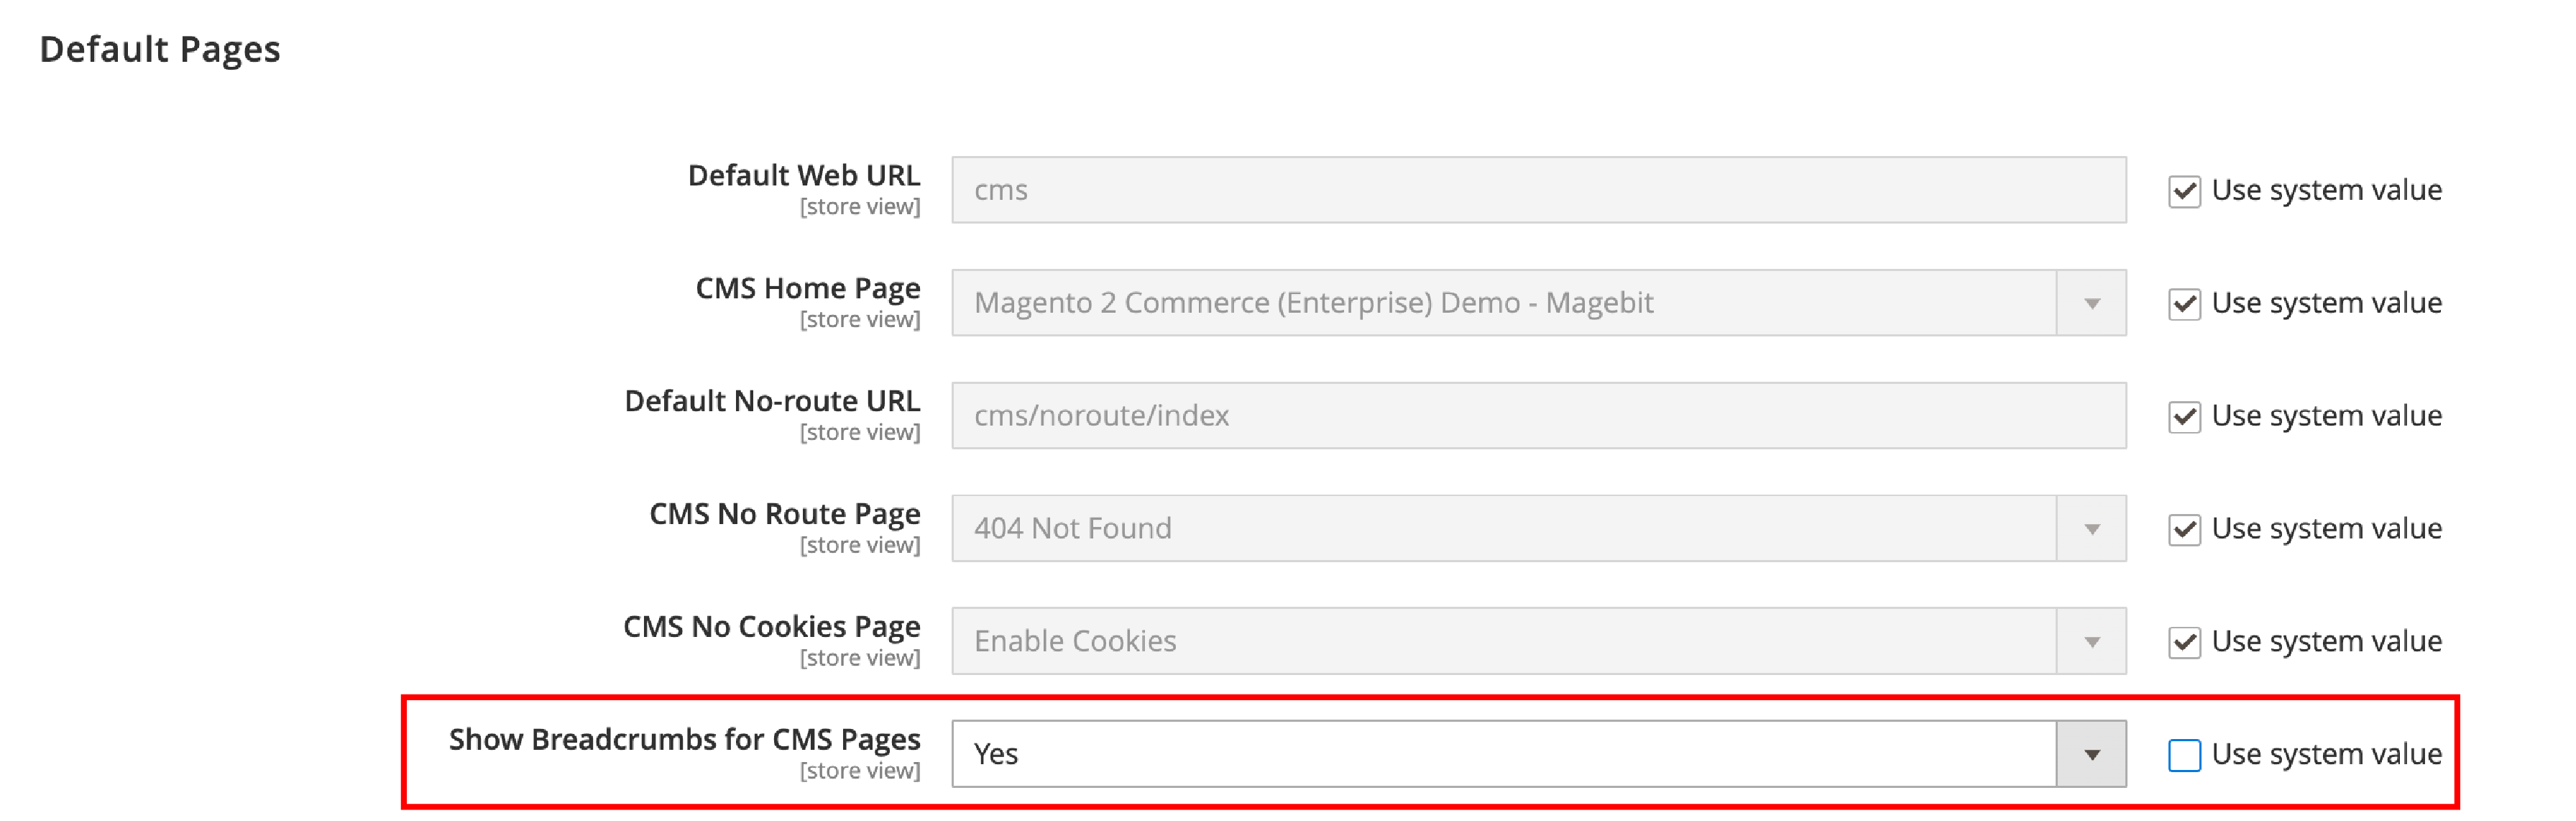 Showing and removing breadcrumbs for CMS pages in Magento 2